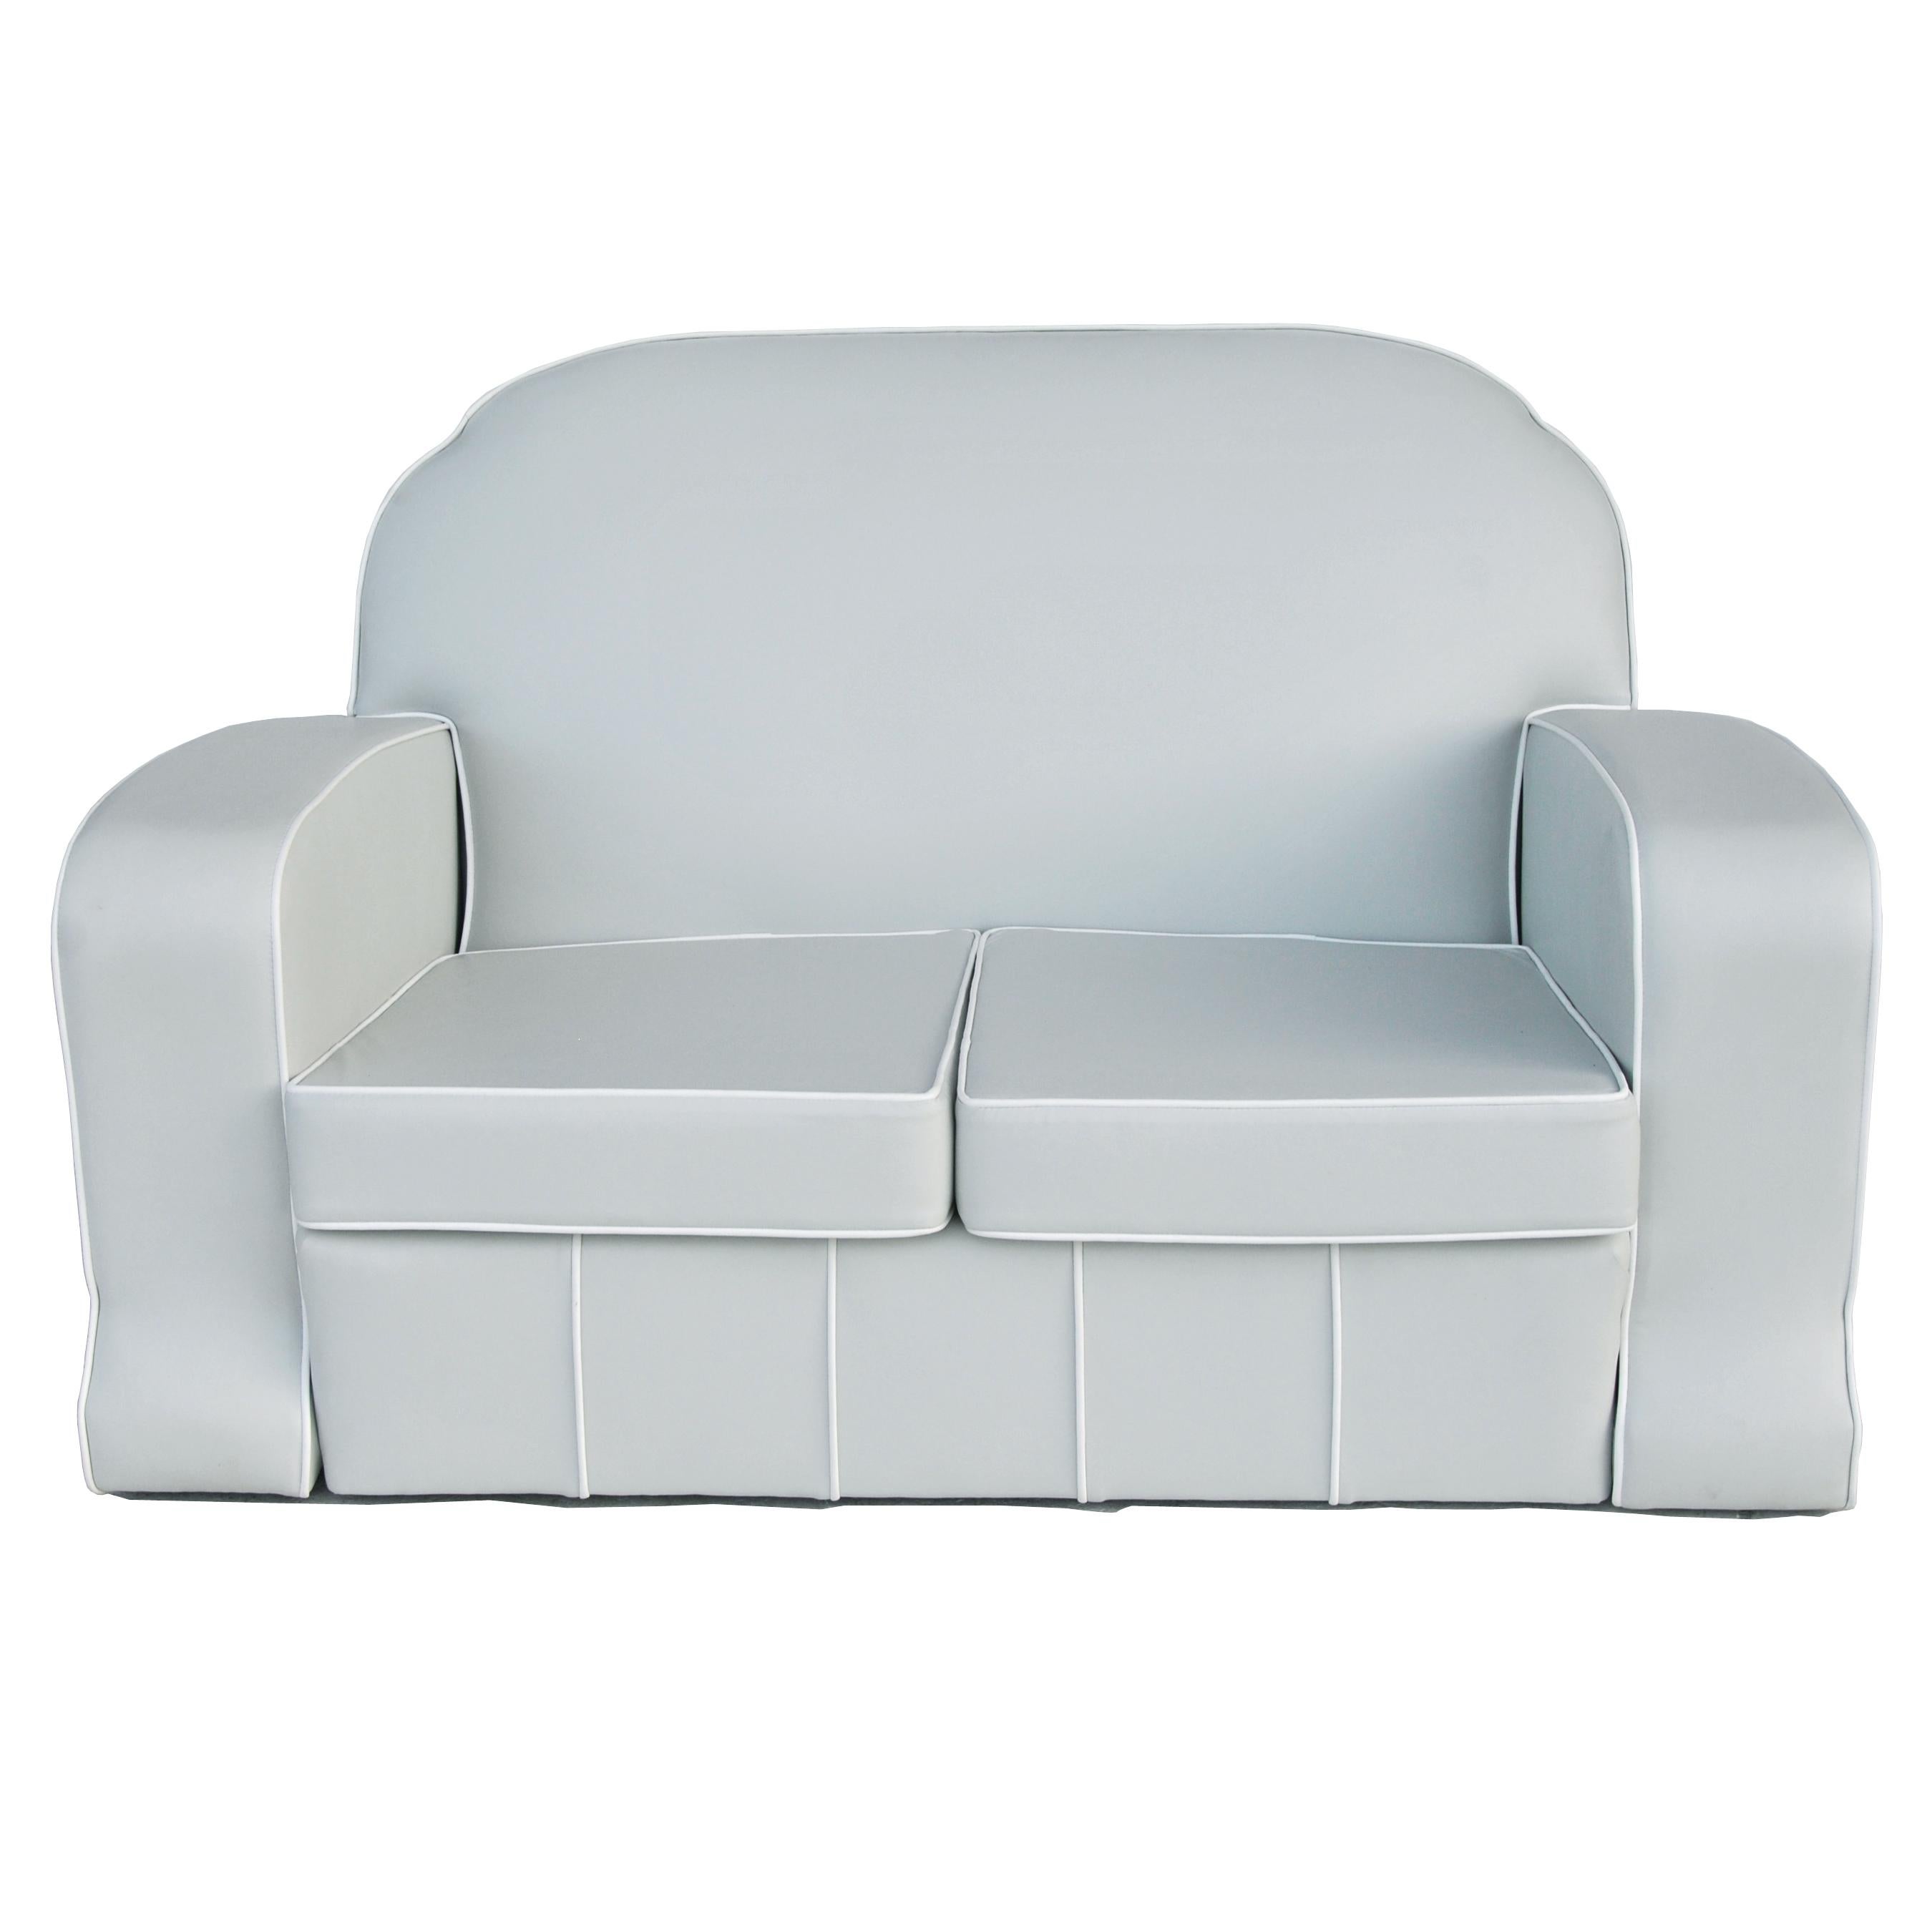 Newly upholstered in off-white/light grey vinyl with an accentuated white piping and
detachable cushion.





   